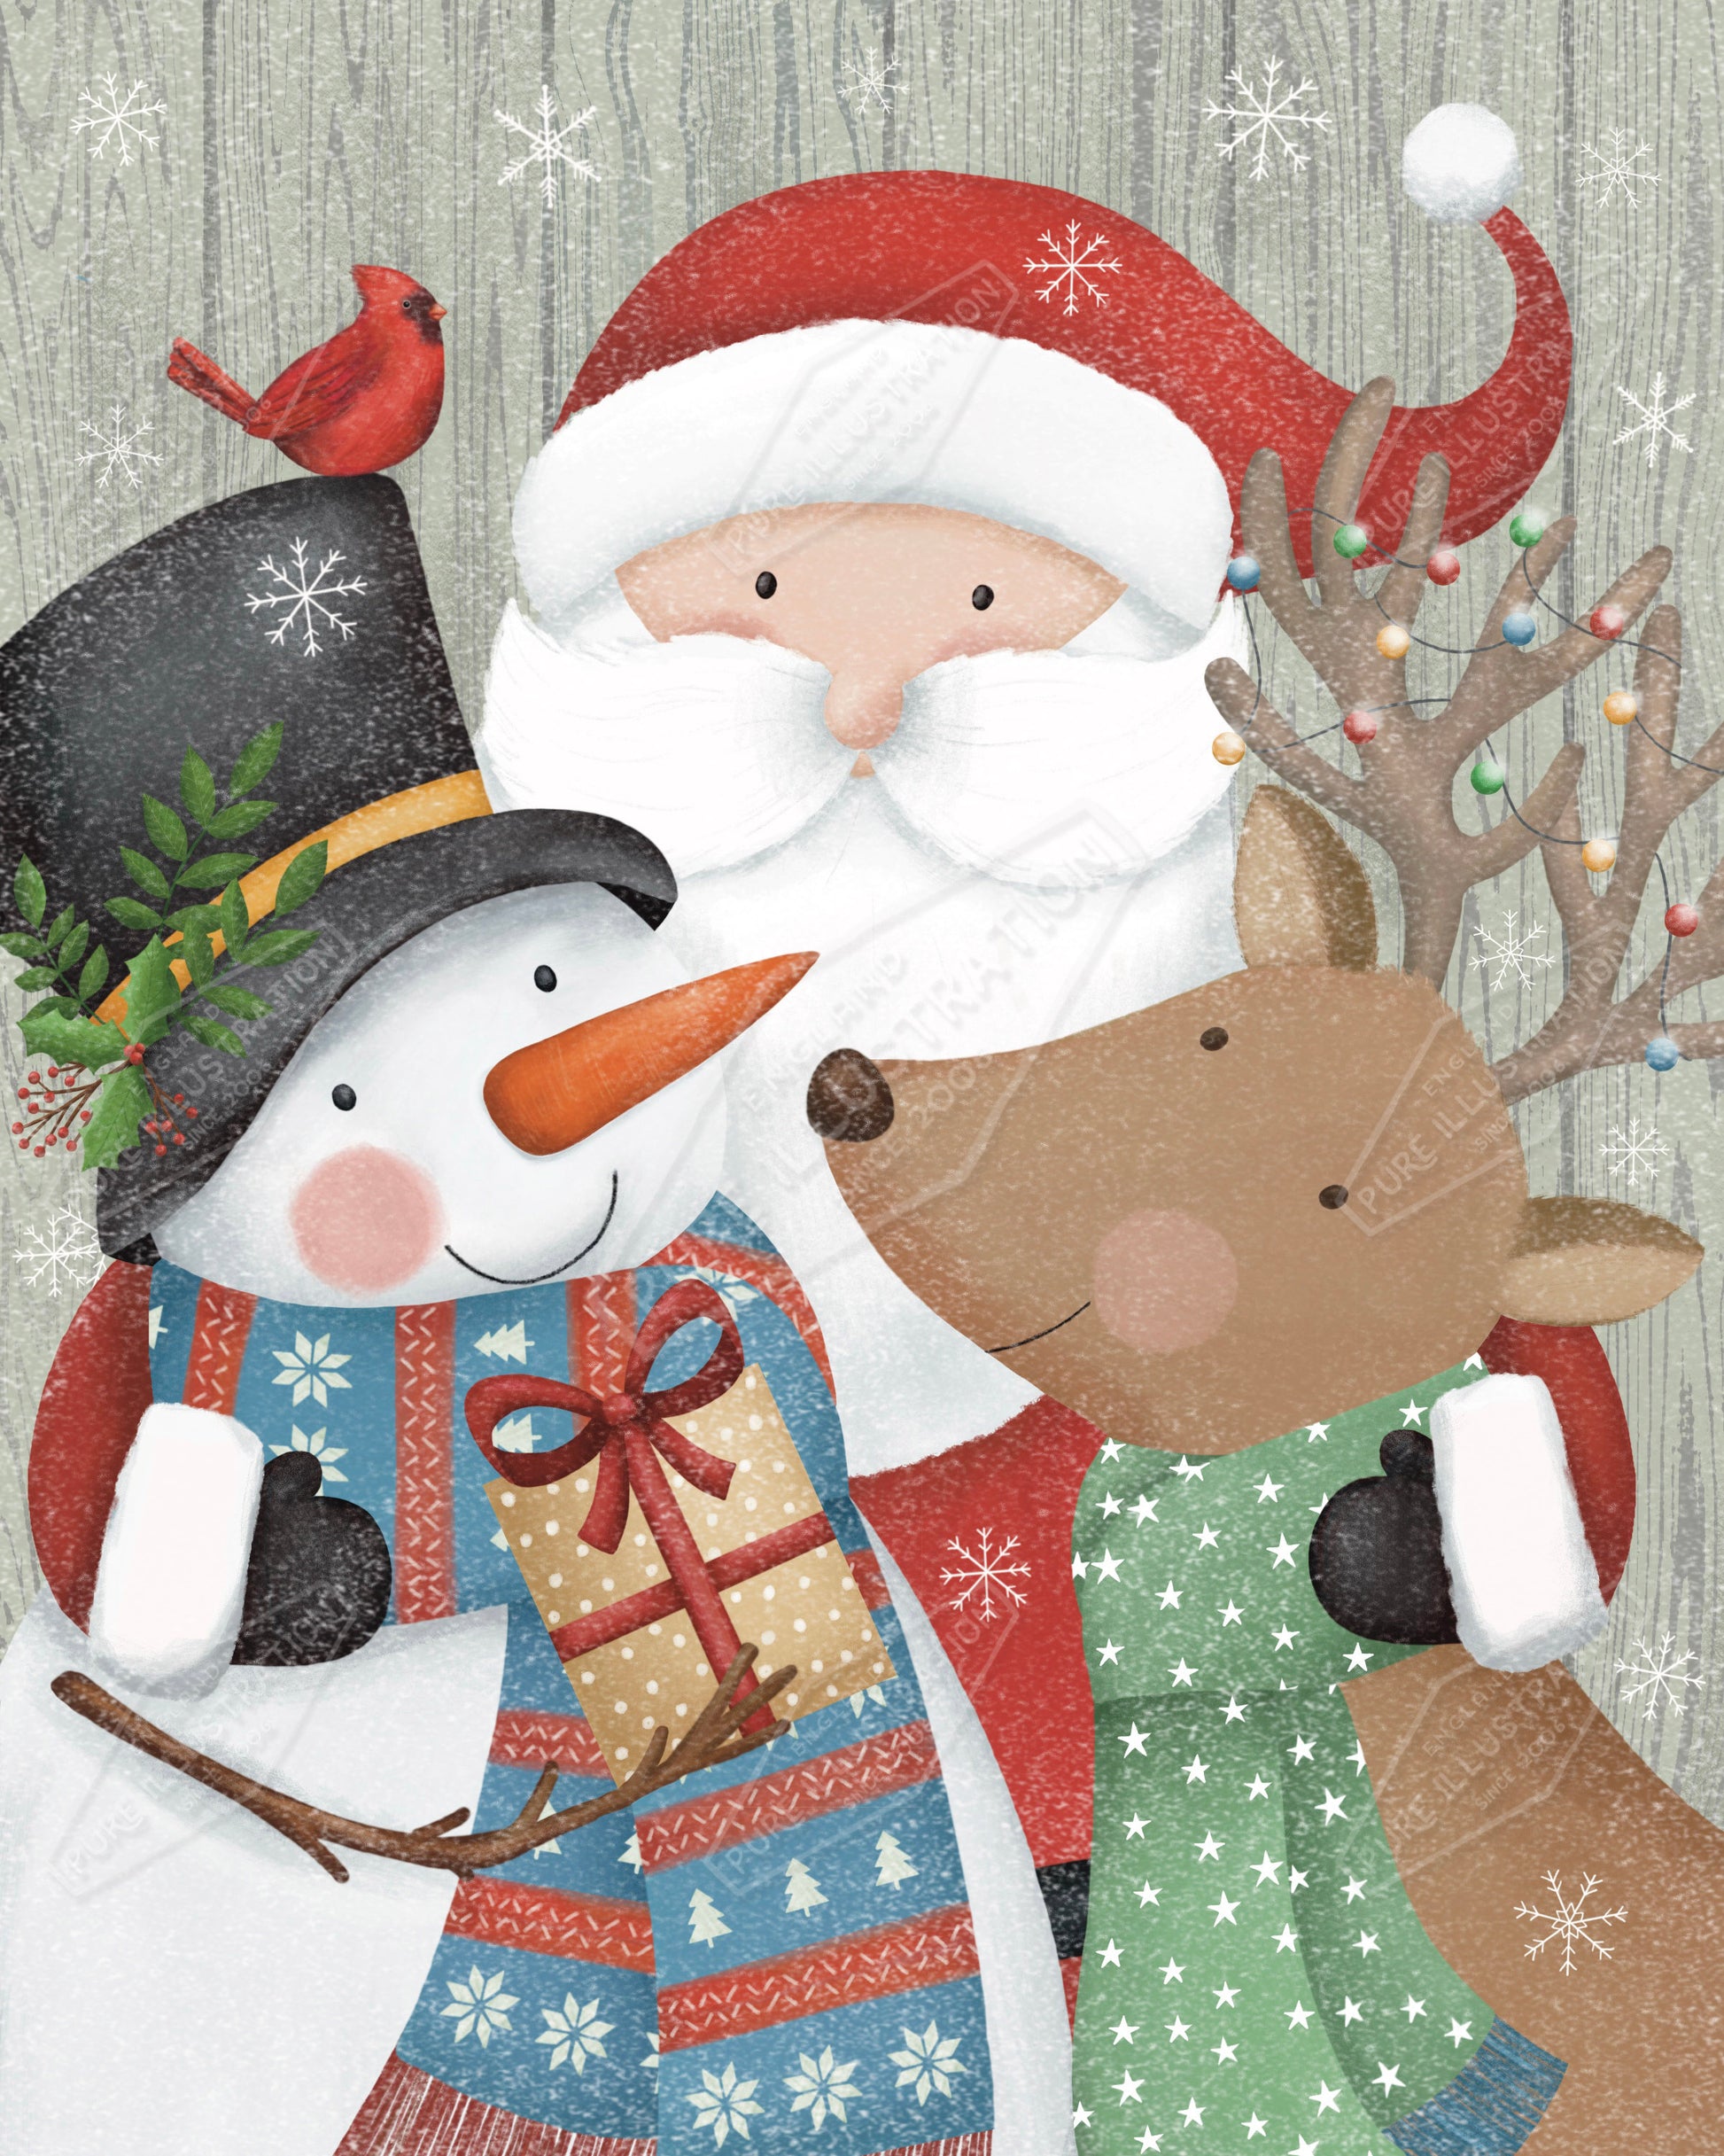 00035623AAI - Anna Aitken is represented by Pure Art Licensing Agency - Christmas Greeting Card Design